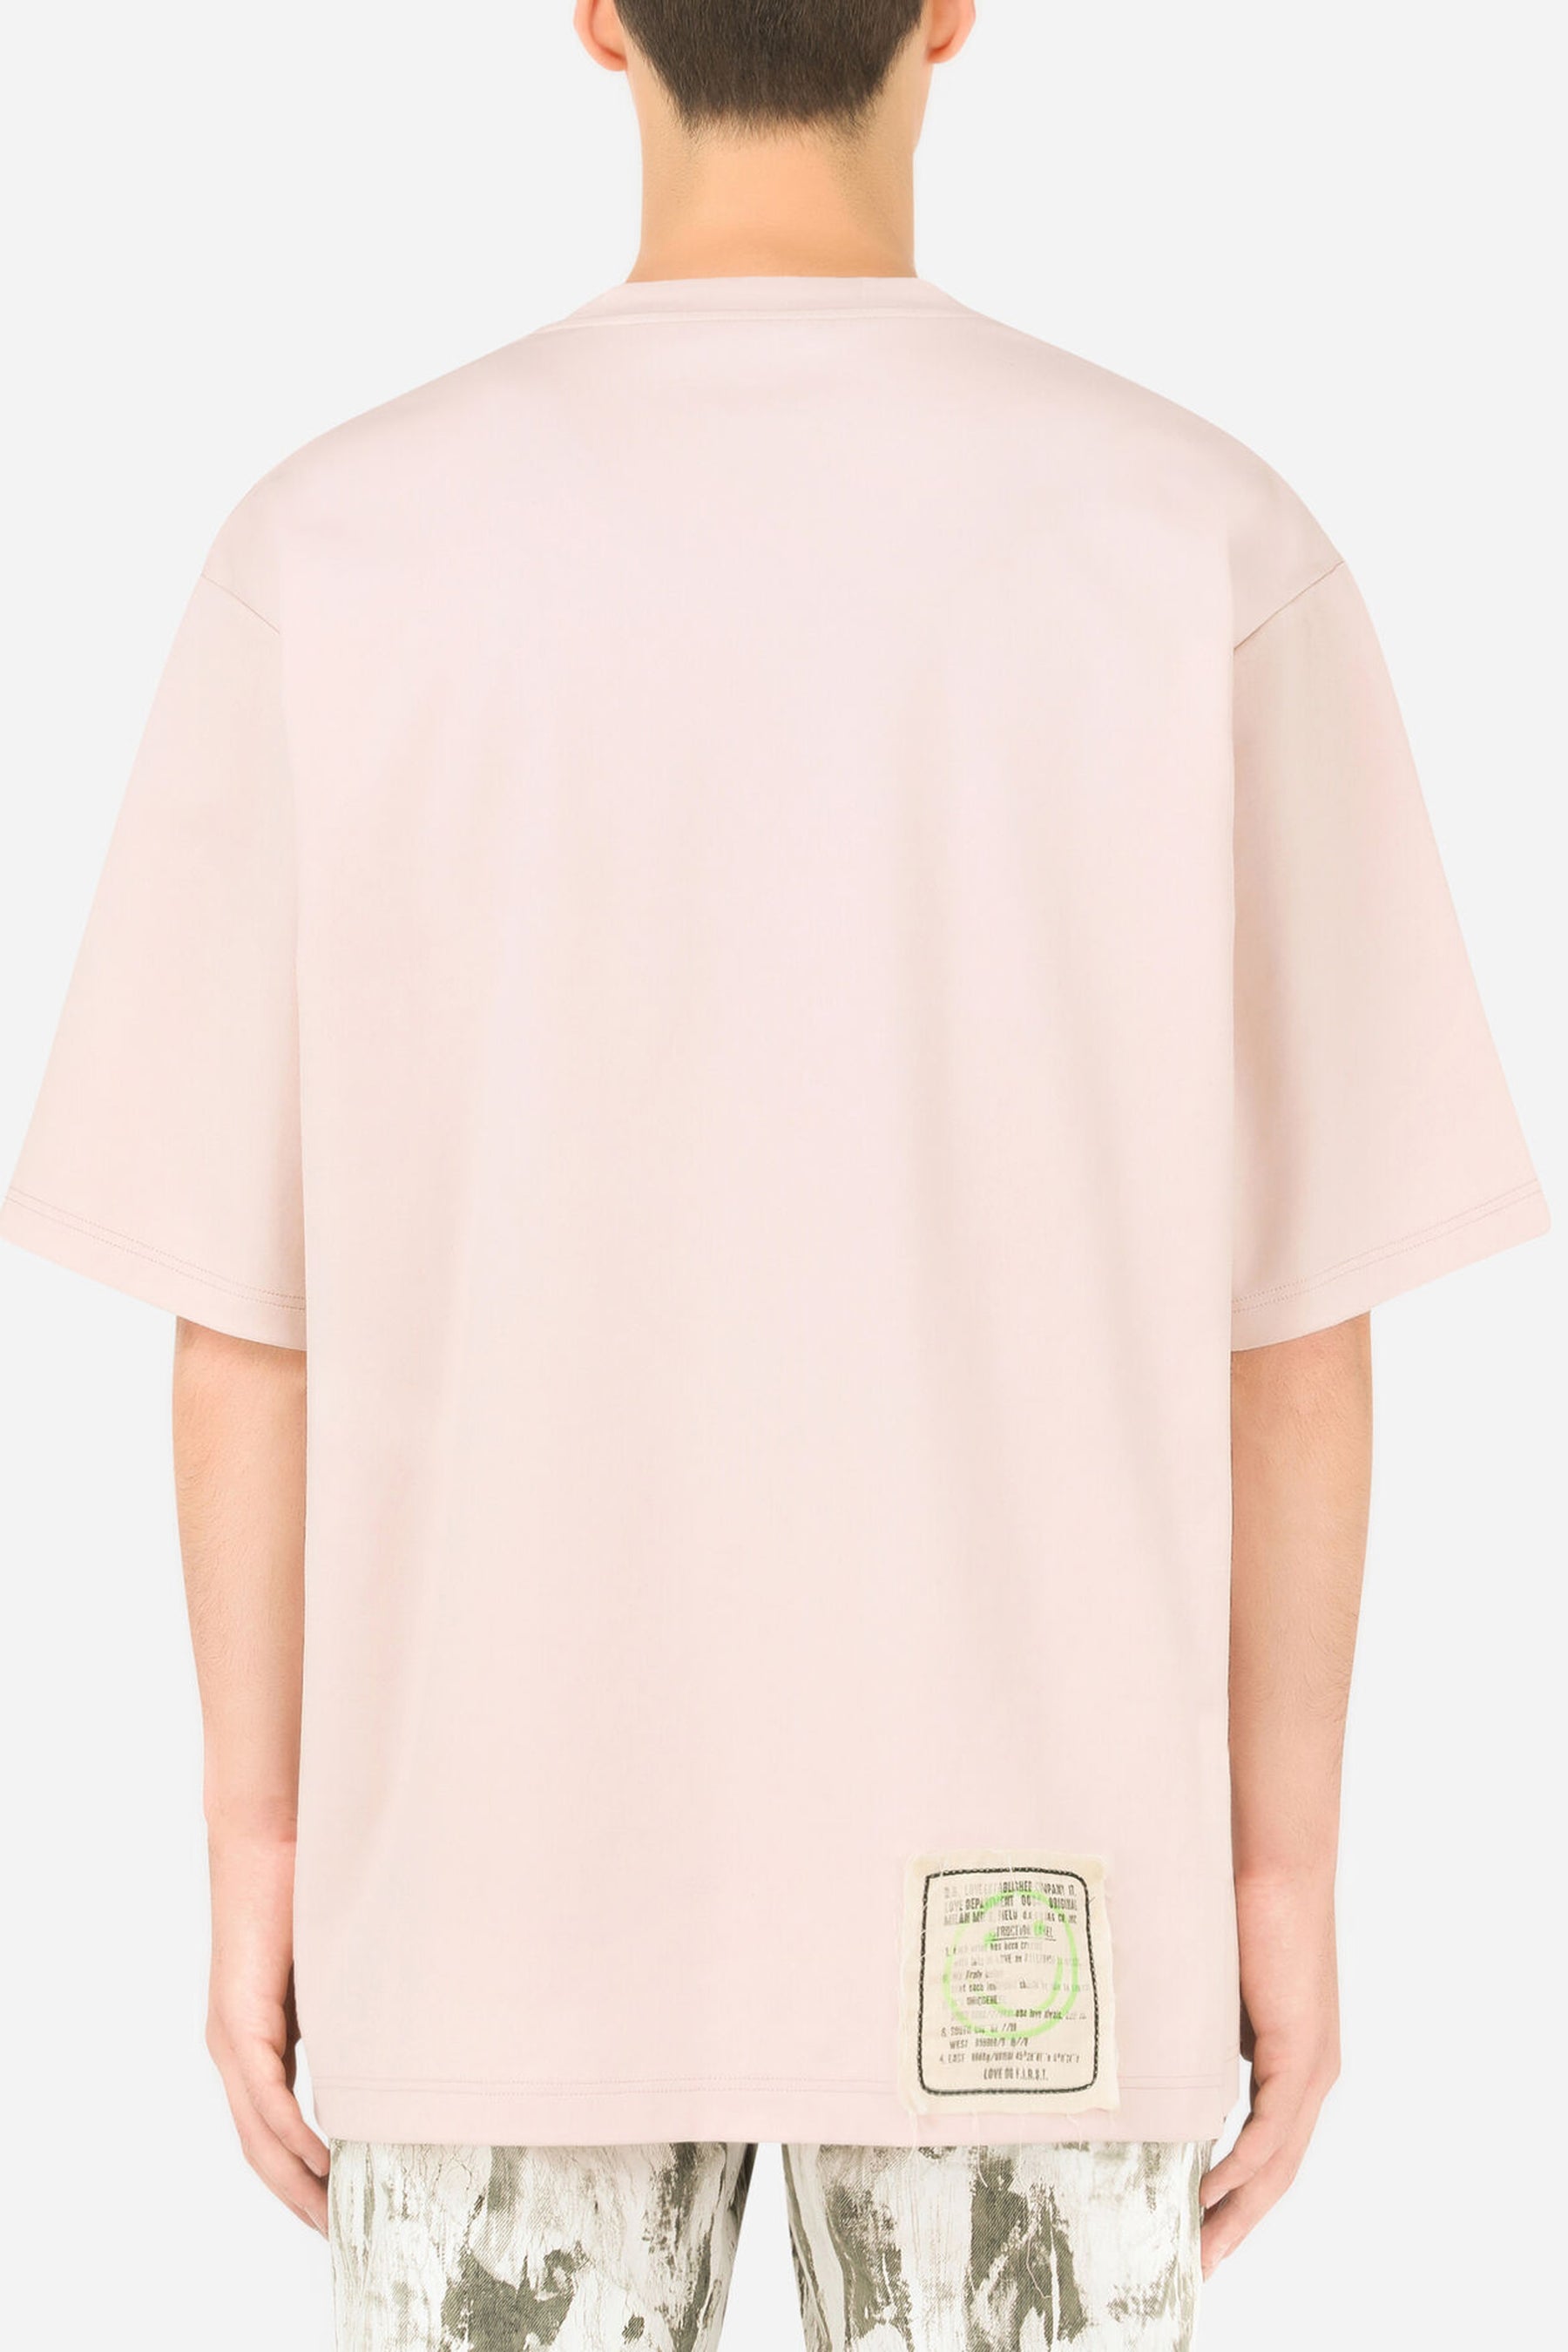 Dolce & Gabbana Pink Printed cotton T-shirt with patch embellishment